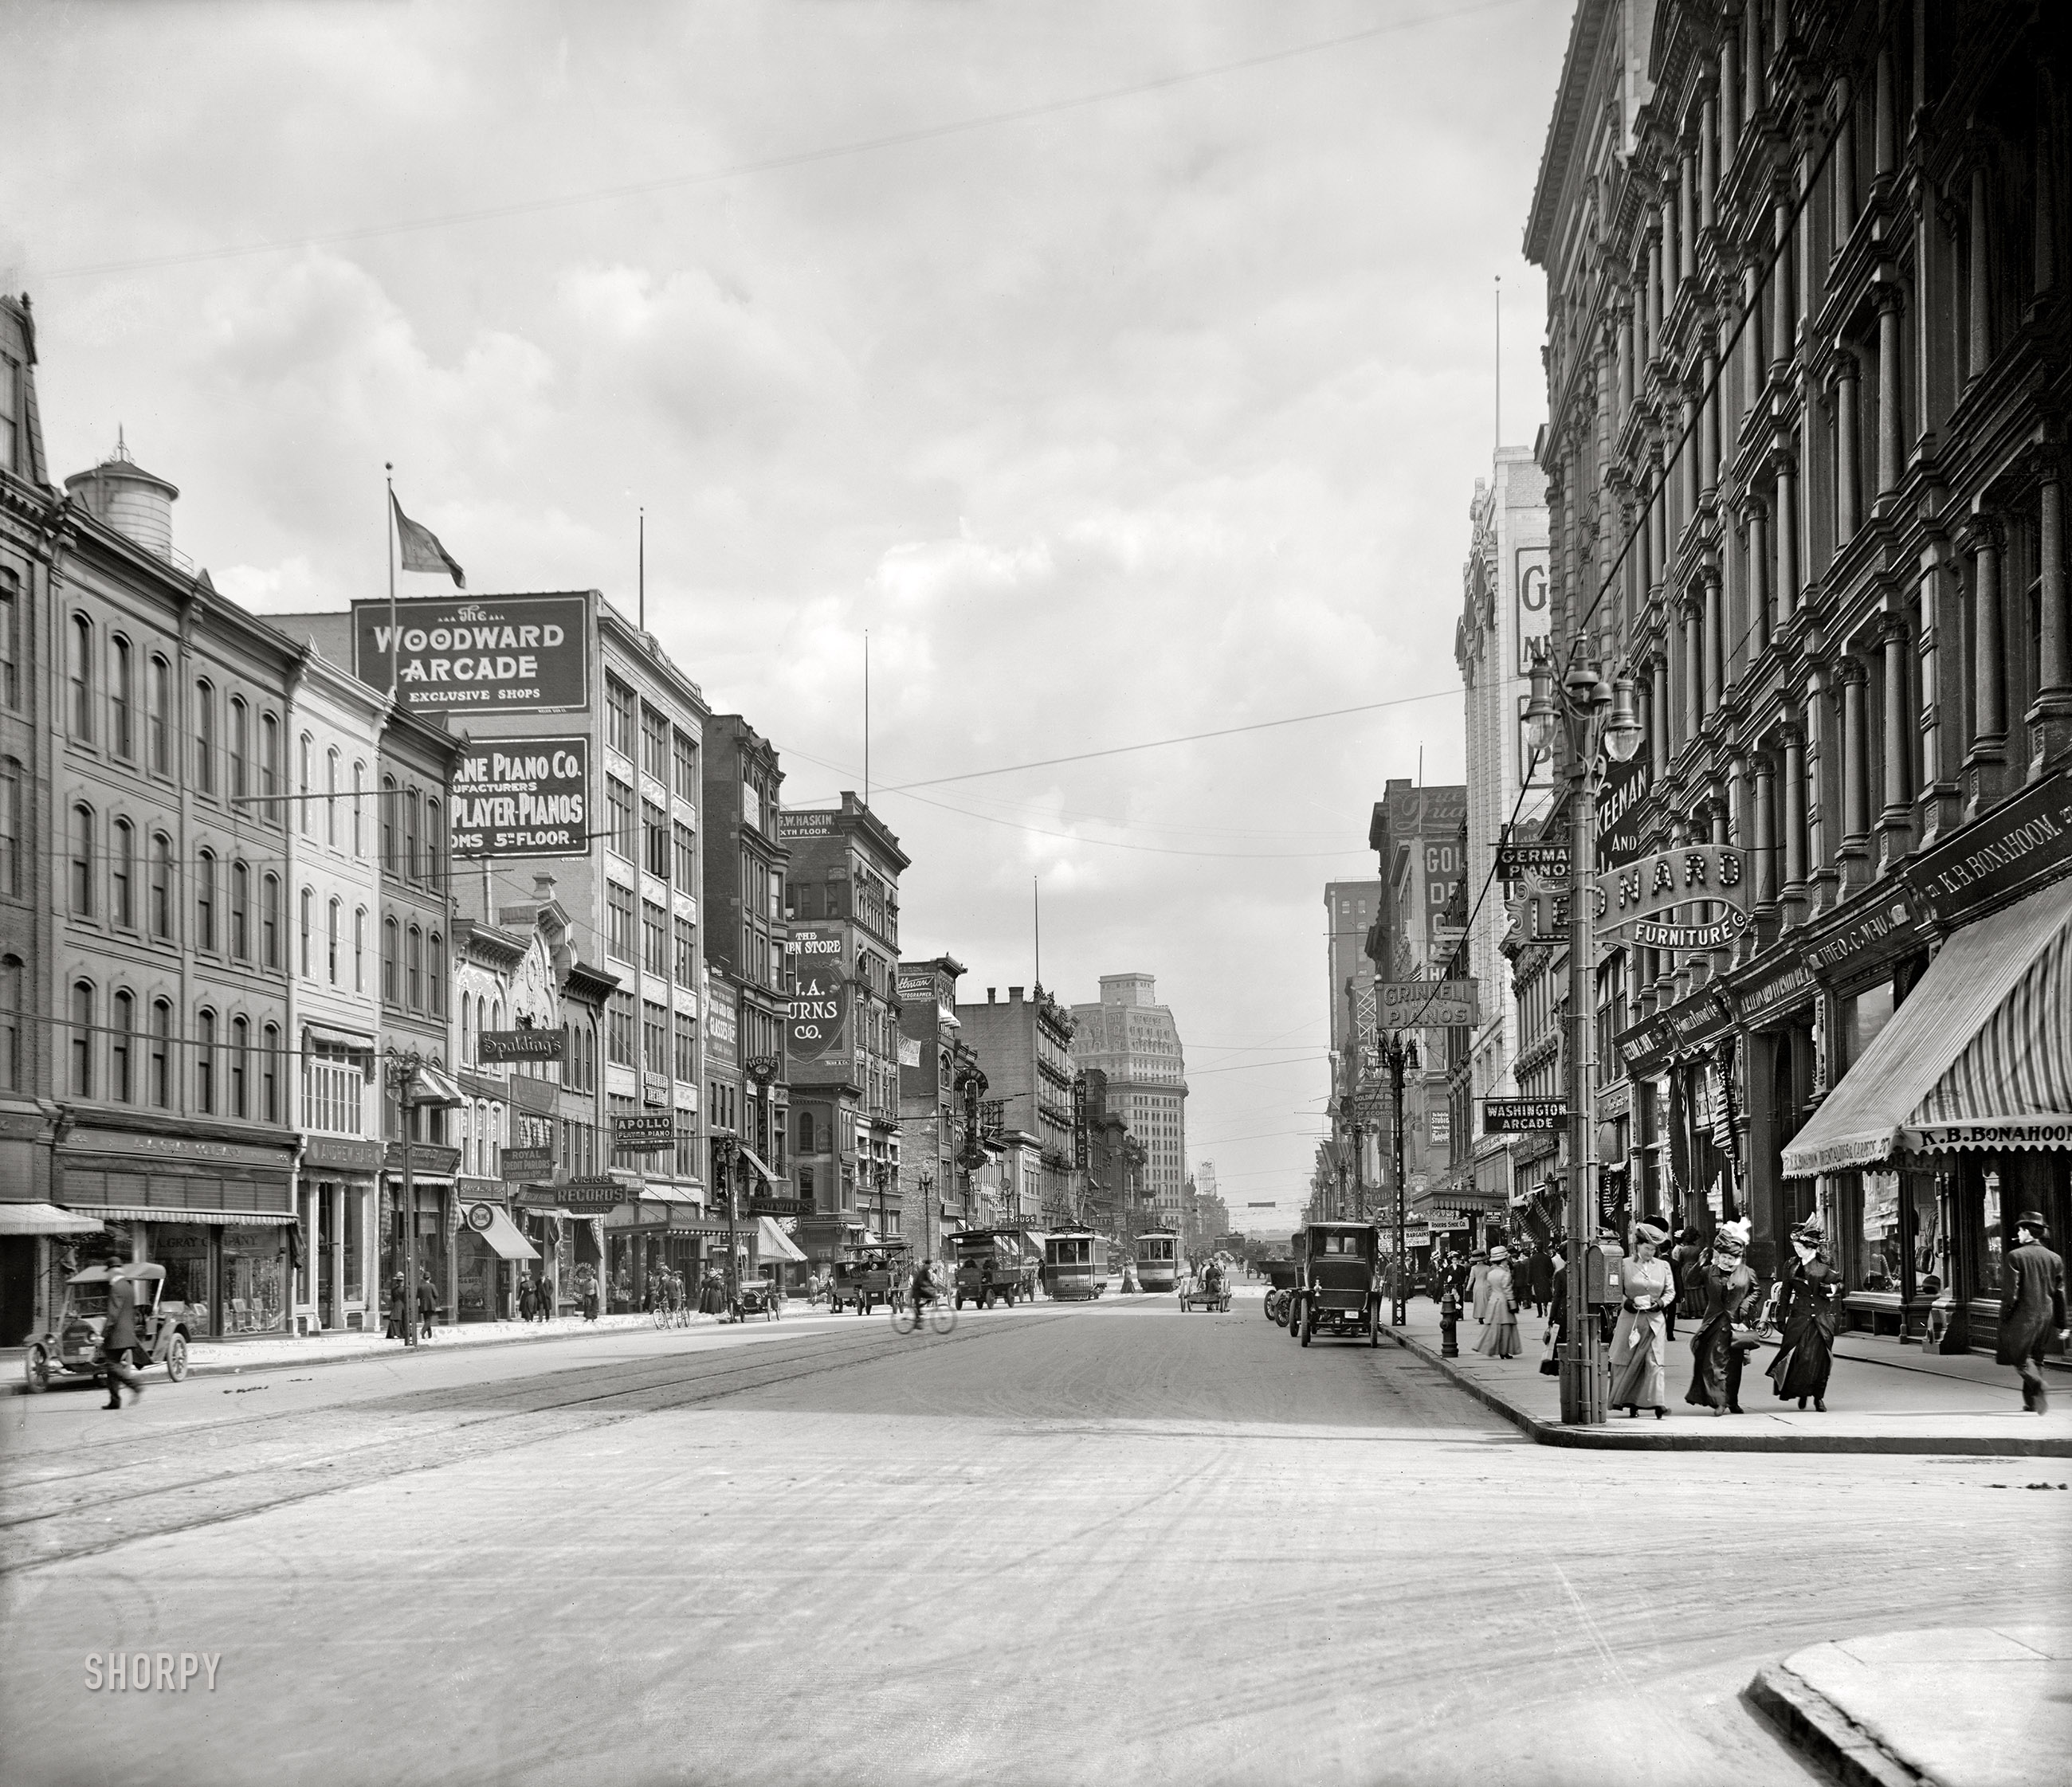 Detroit, 1910. "Woodward Avenue." A prequel to the bustling scene depicted here. 8x10 inch dry plate glass negative, Detroit Publishing Company. View full size.